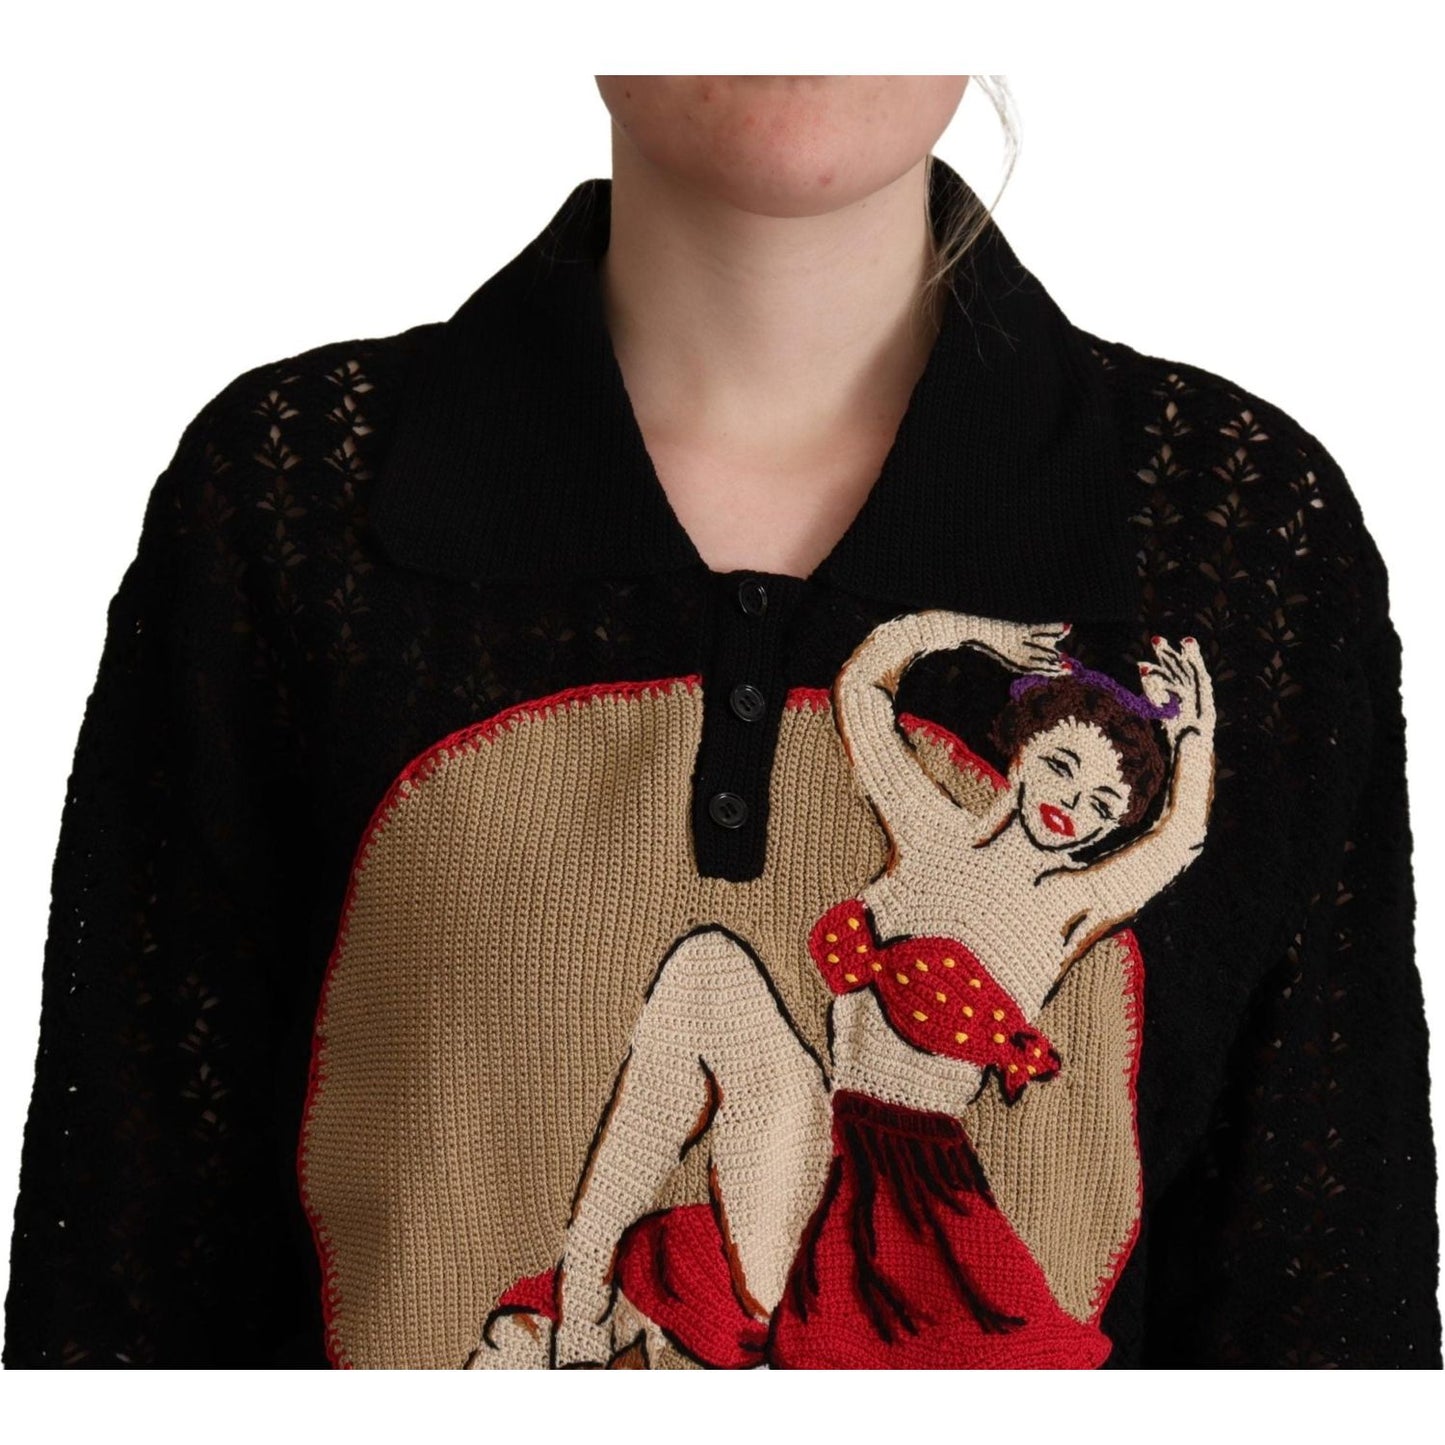 Dolce & Gabbana Embroidered Short Sleeve Luxury Sweater black-embroidered-knitted-cotton-sweater